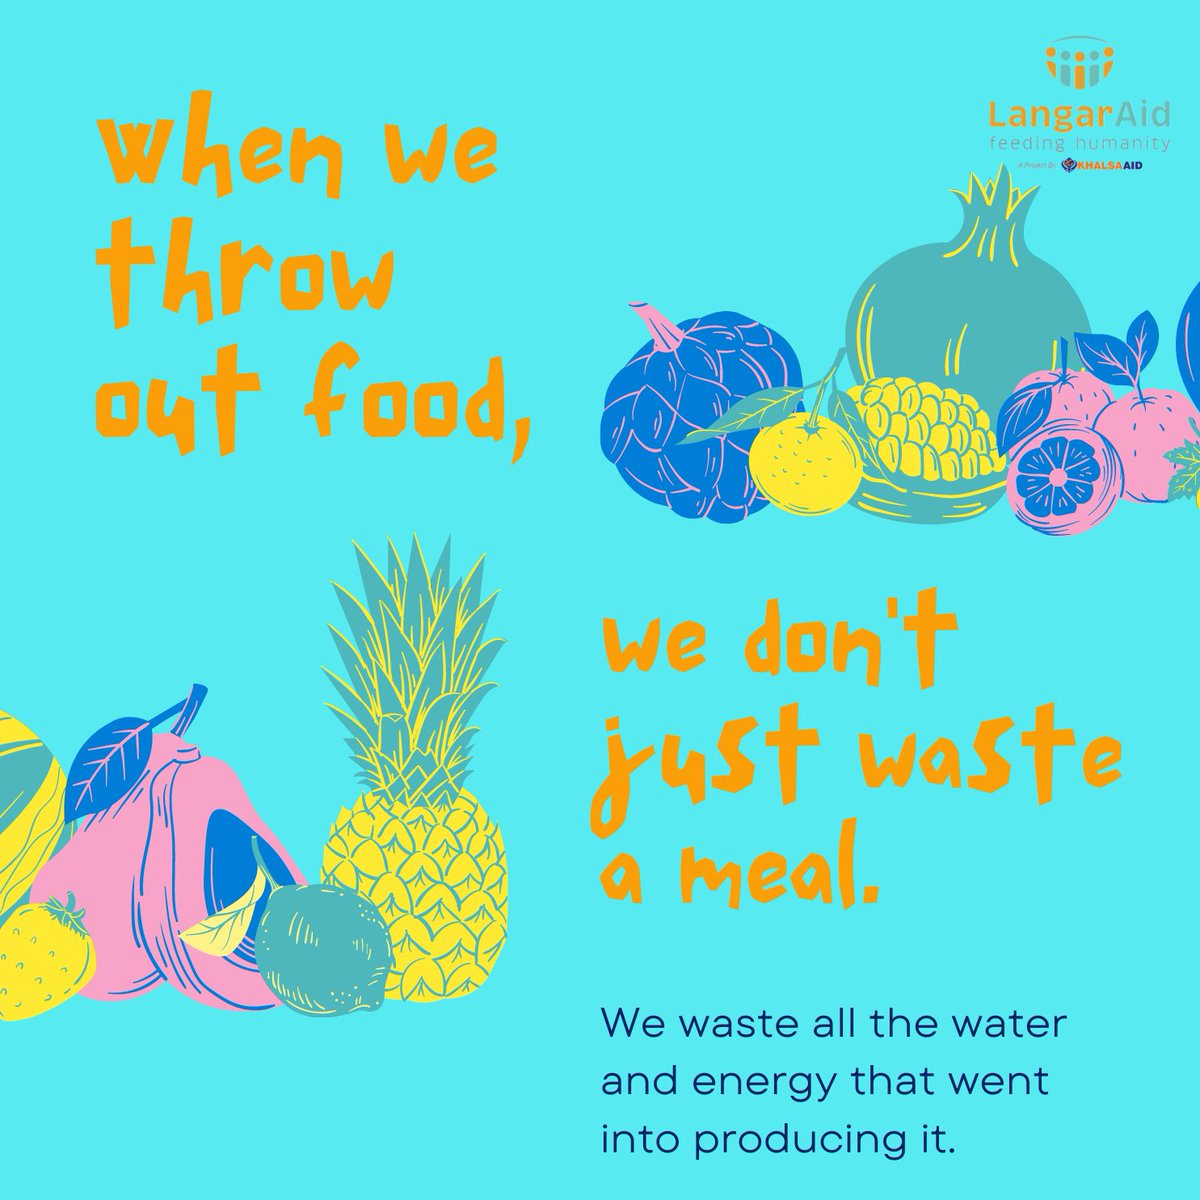 Let's cherish every bite and reduce food waste! When we waste food, we also squander the water and energy invested in its production. Small actions can make a big difference. 🌍🍽️ #ReduceFoodWaste #Sustainability #LangarAid #KhalsaAid